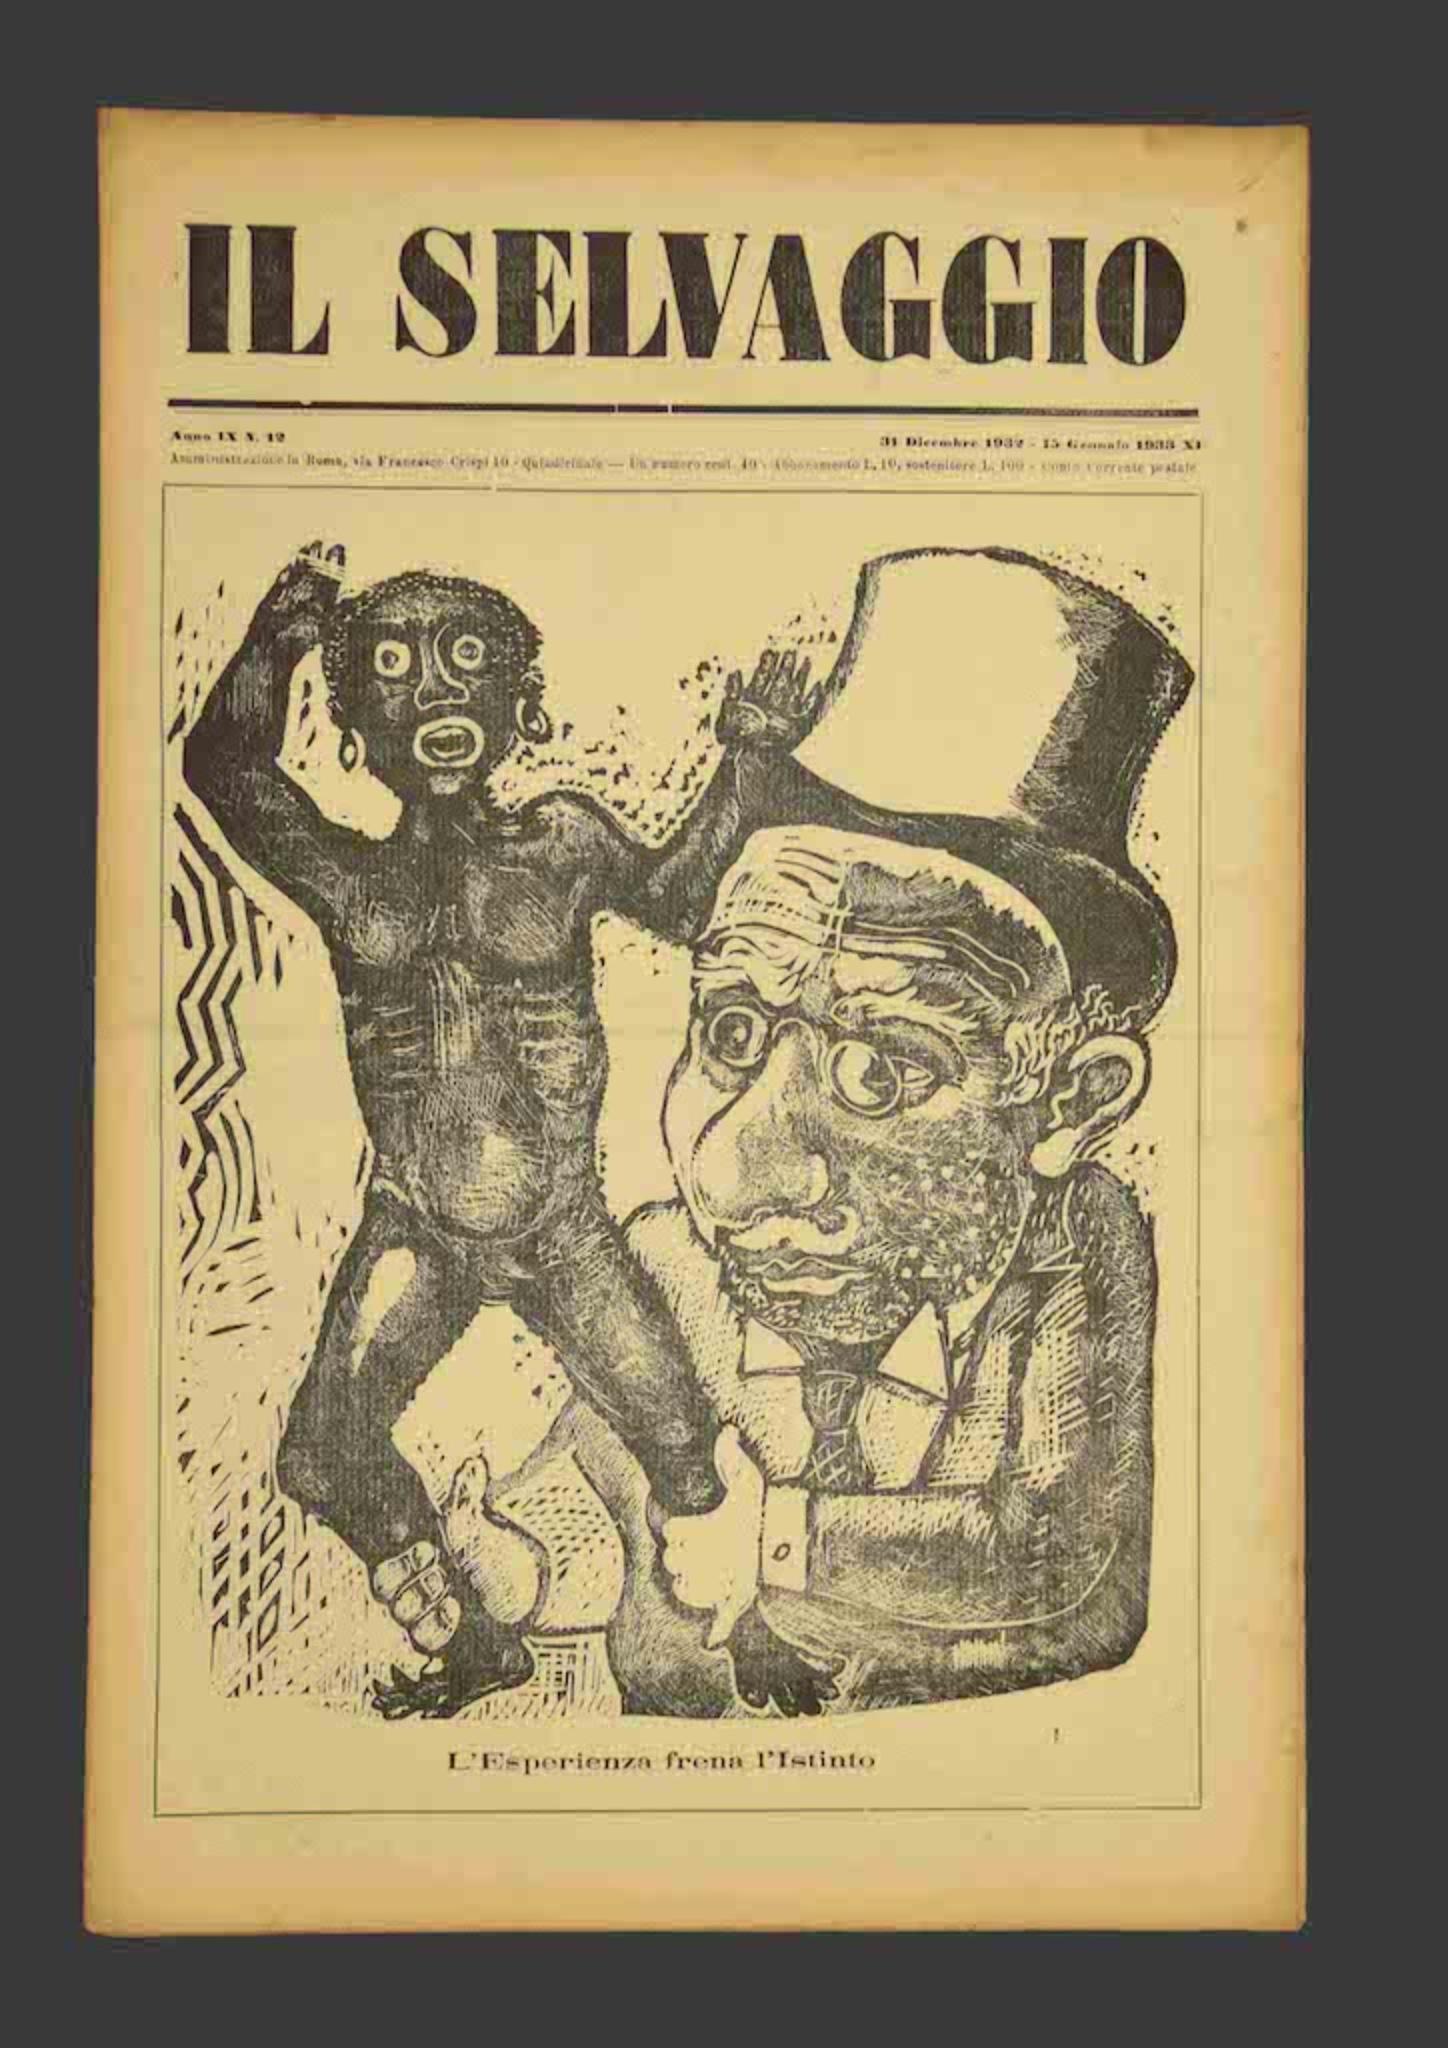 "Il Selvaggio, no.12- 1932", "Annual supporter subscription - Una copia 40 Cent - Fortnightly Newspaper letters arts and sciences", including original woodcuts by the artist Mino Maccari. 8 pages.

Good conditions, aged with some diffused